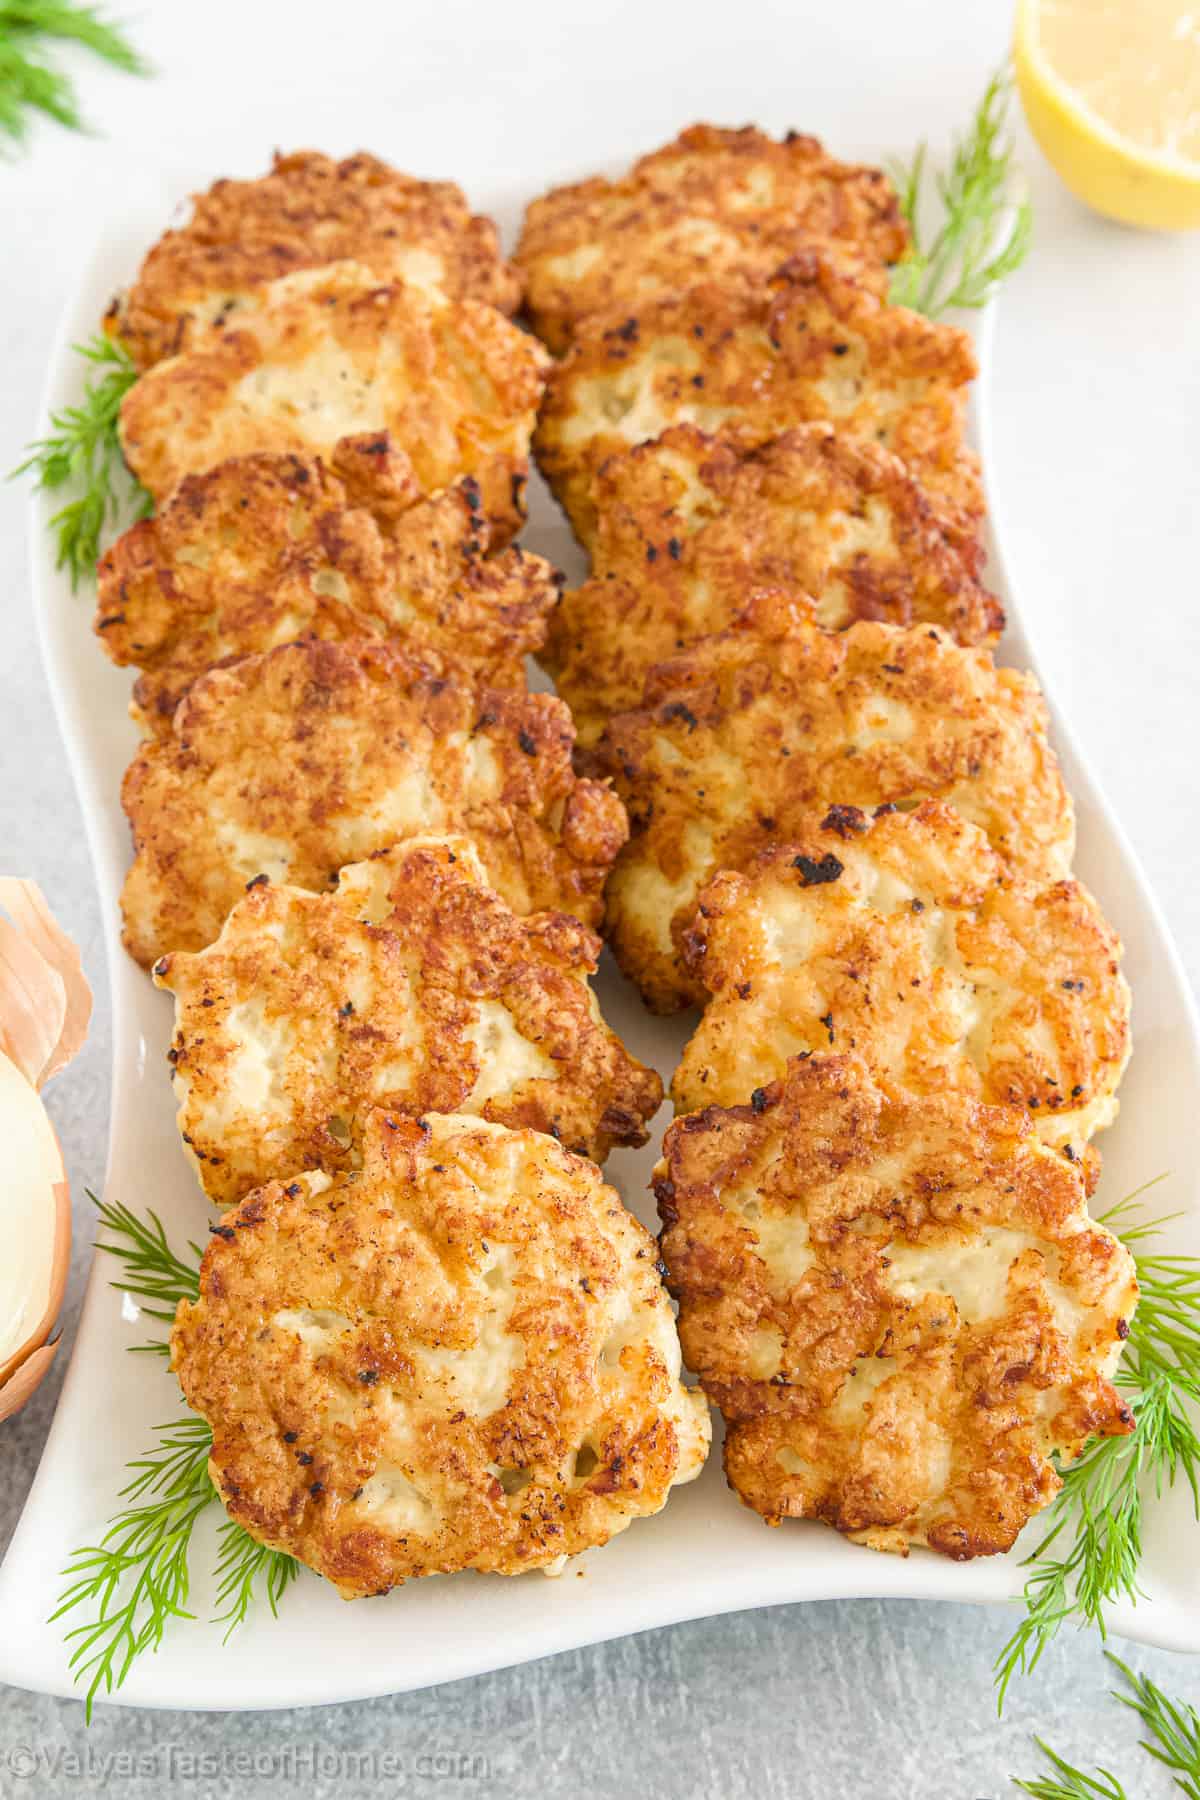 These Chicken Fritters are quick and easy to make and are crispy on the outside, and soft, juicy, and tender on the inside with a hint of garlic!